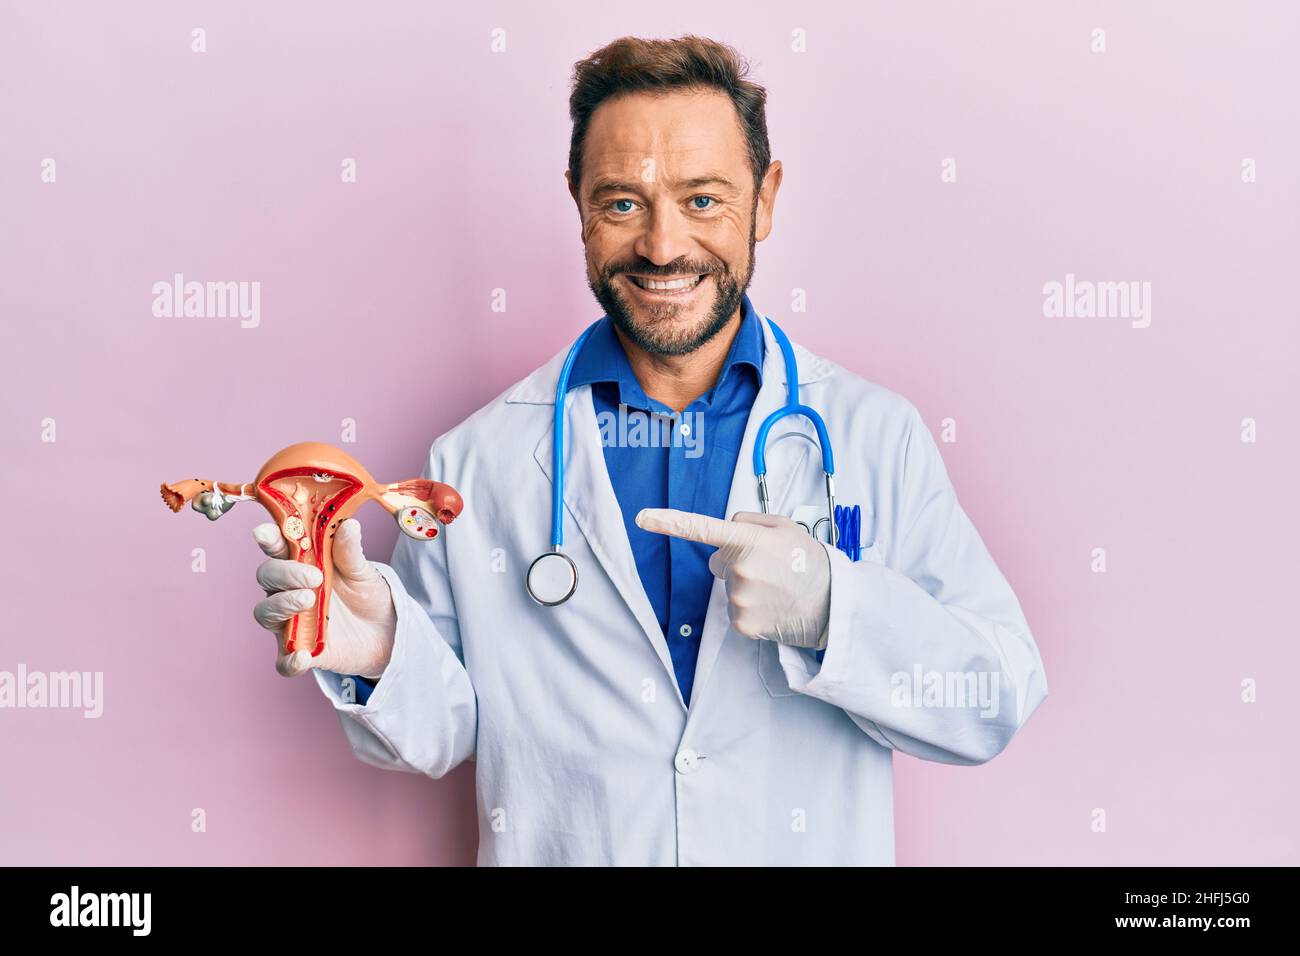 Middle age gynecologist man holding anatomical model of female genital organ smiling happy pointing with hand and finger Stock Photo